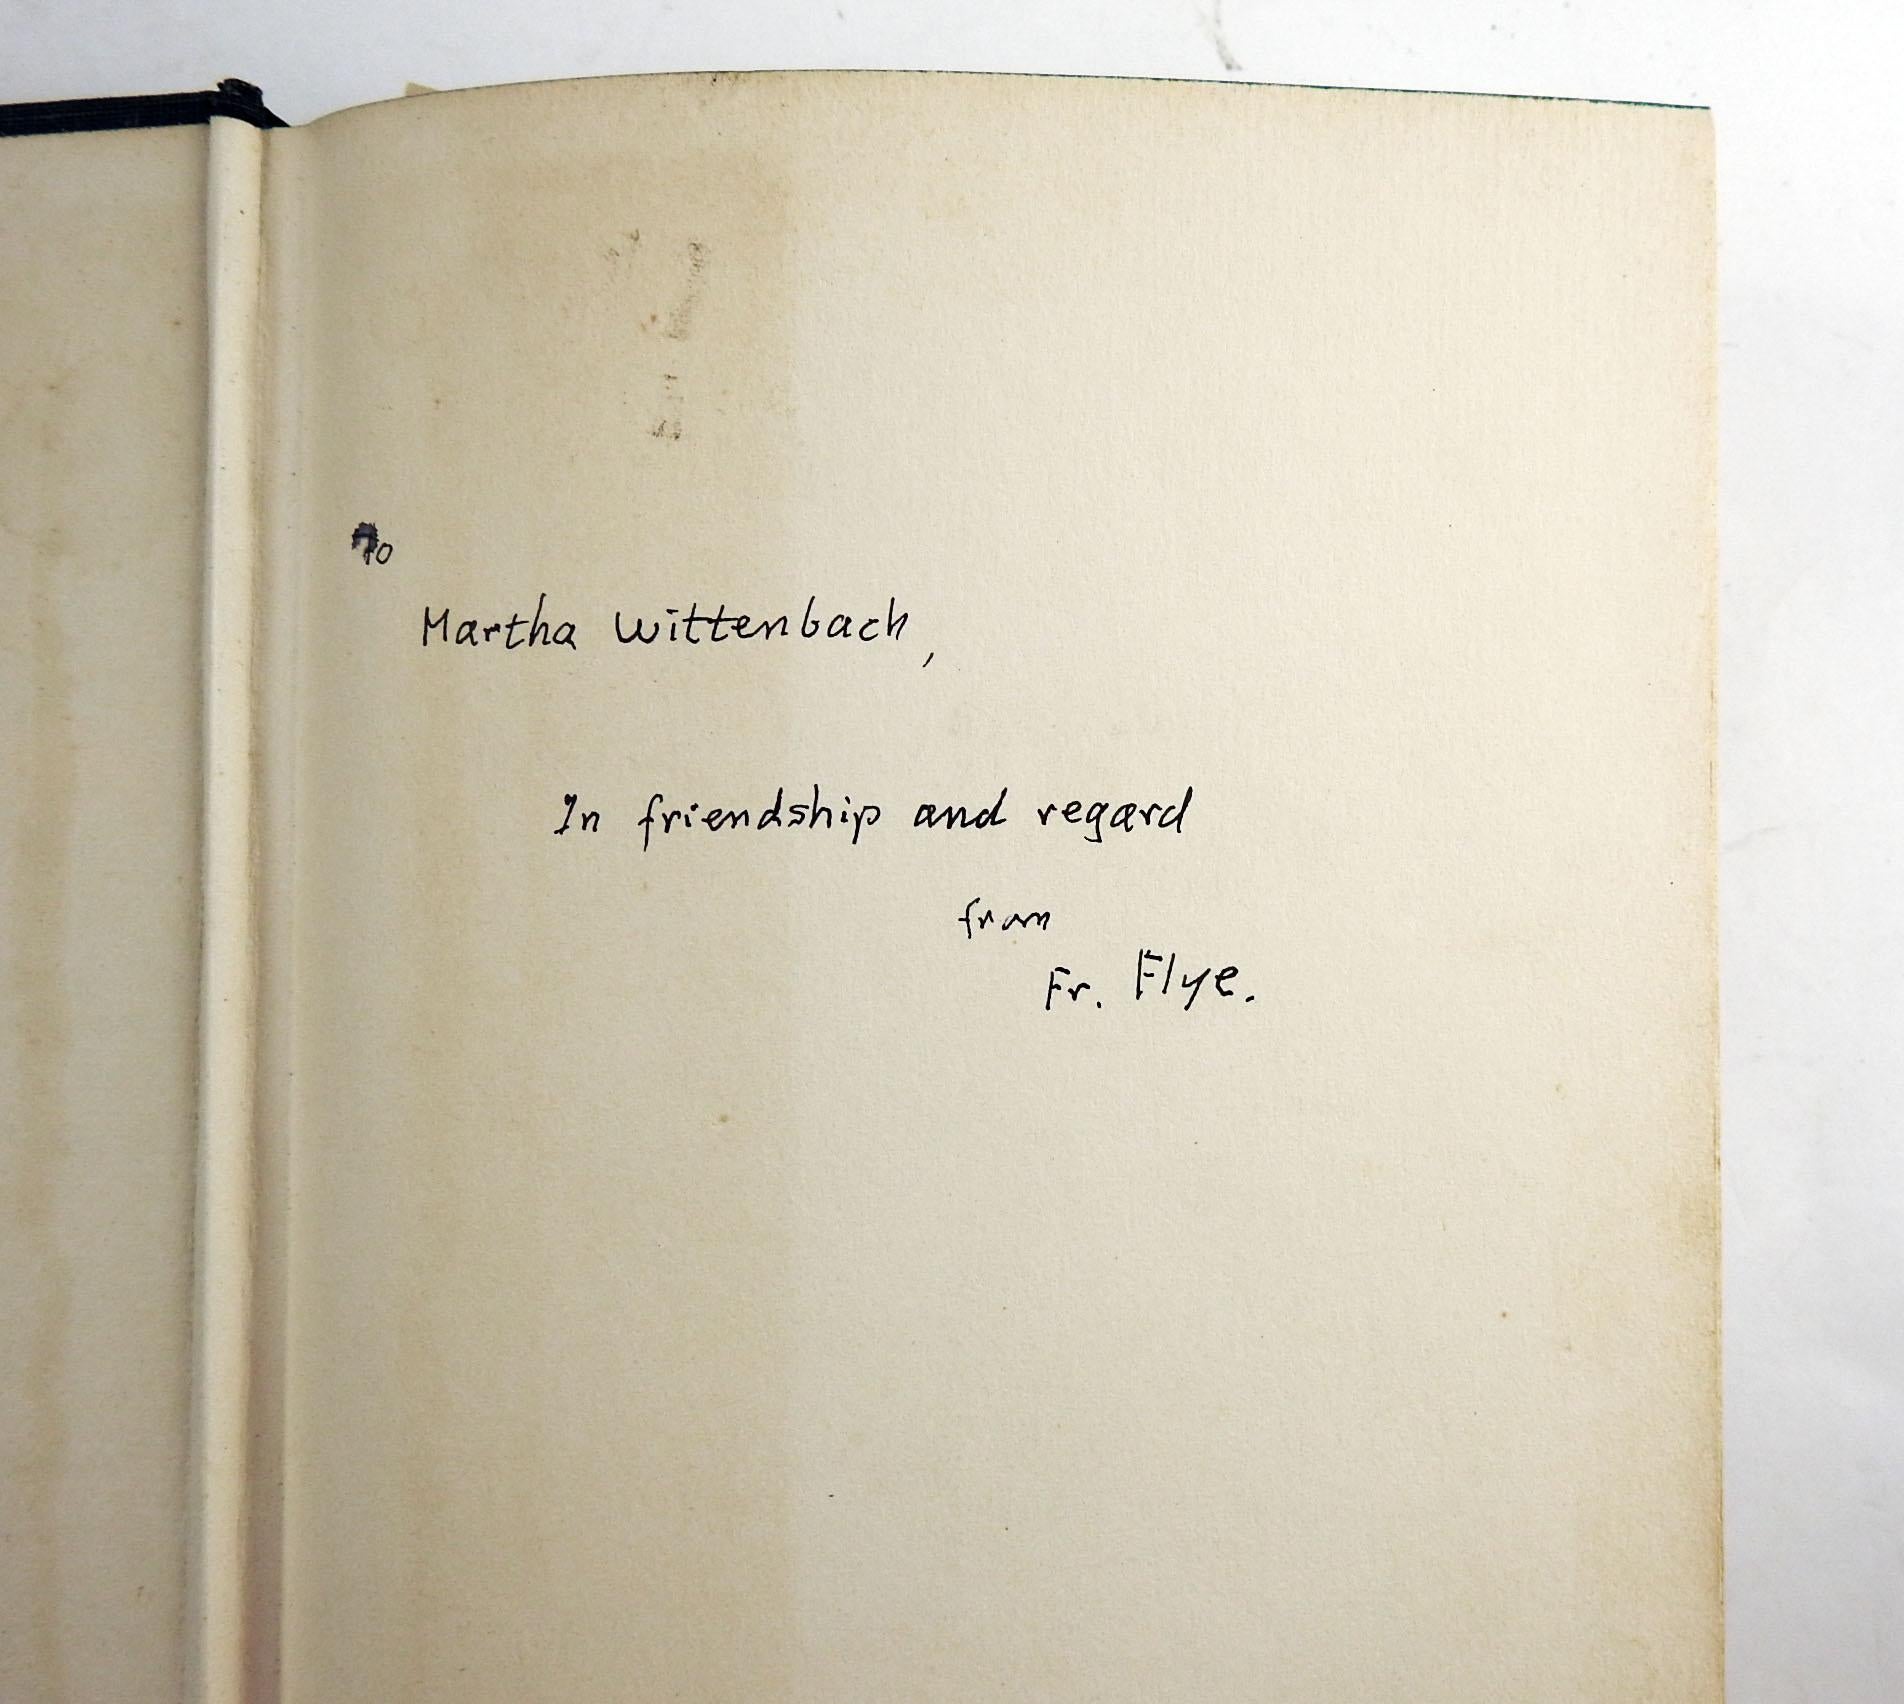 Letters of James Agee to Father Flye. New York: George Braziller, 1962. 1st Edition signed and inscribed by Father Flye. Blue cloth binding, dust jacket. Shelf wear, chips and spots to dust jacket. Also included are handwritten manuscript fragments